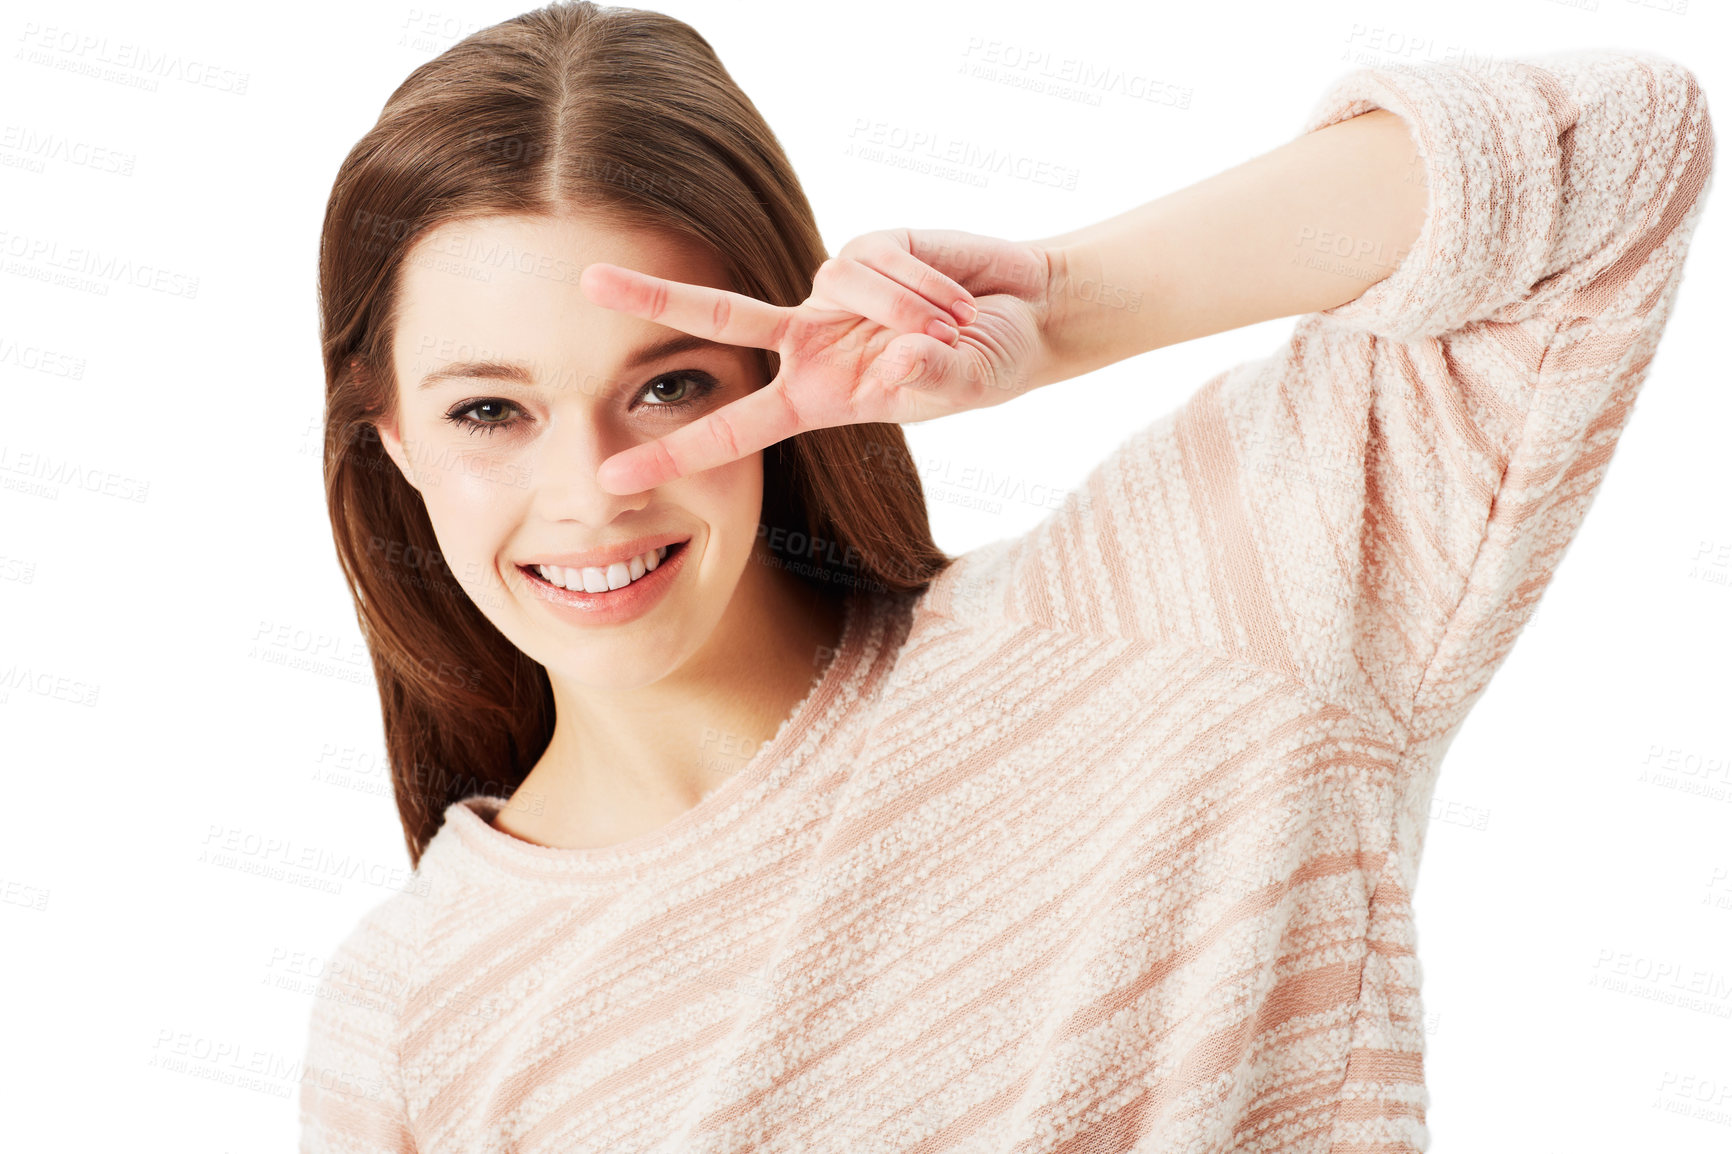 Buy stock photo Studio shot of an attractive young woman showing the peace sign